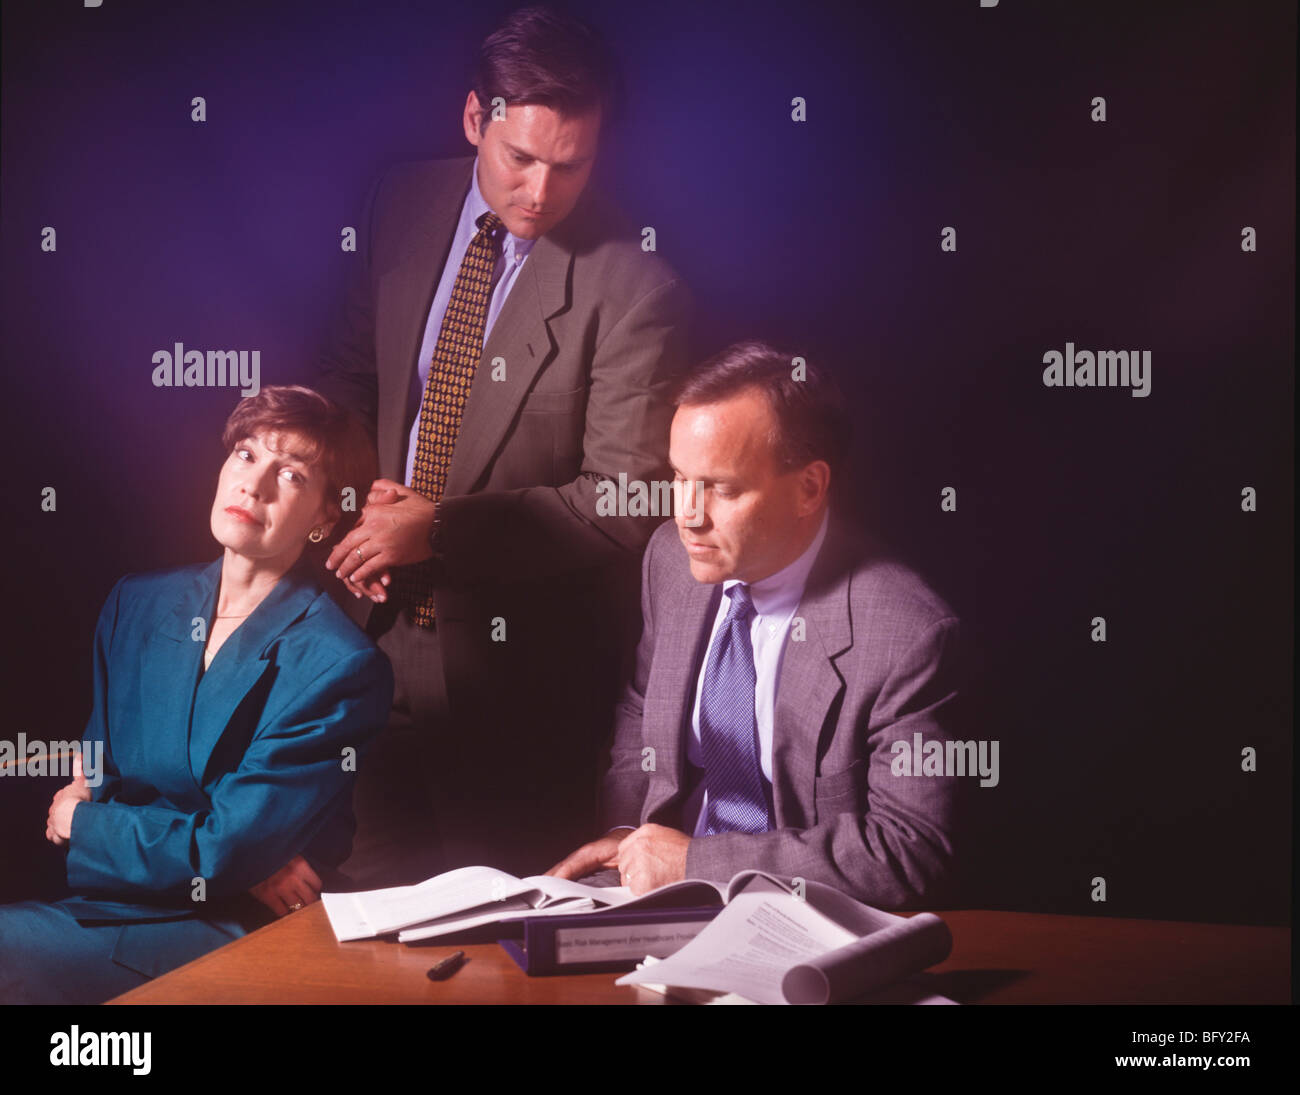 Group of office workers in conference meeting reacting while trying to reach agreement on corporate plans. Stock Photo